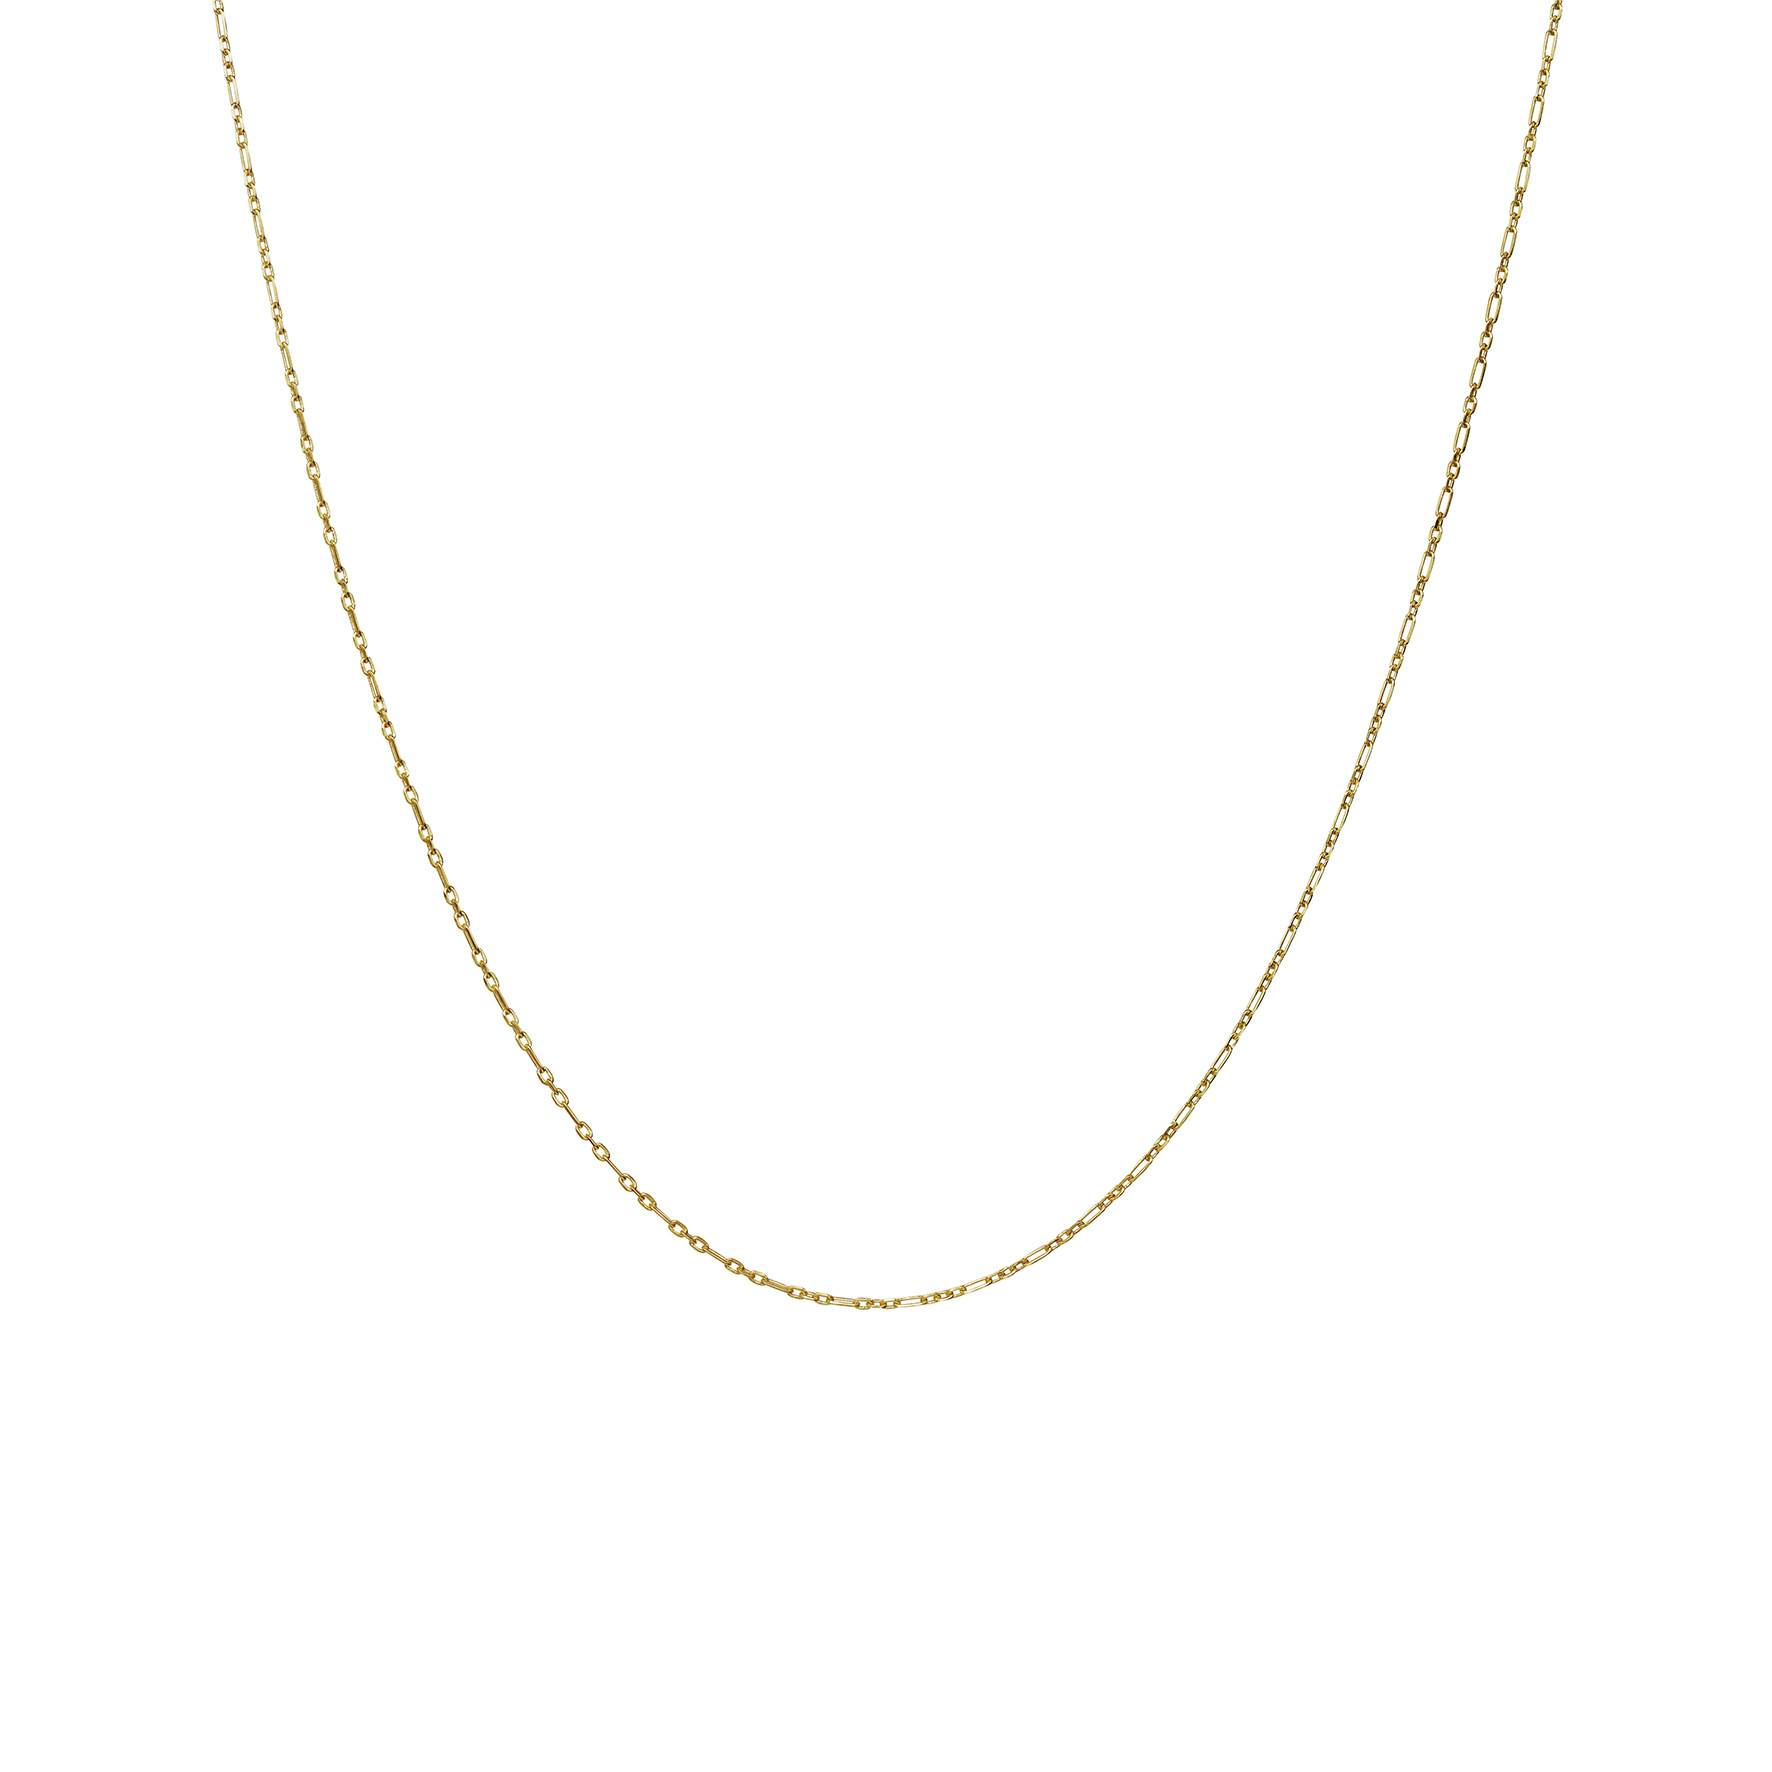 Kris Medium Necklace from Maanesten in Goldplated-Silver Sterling 925